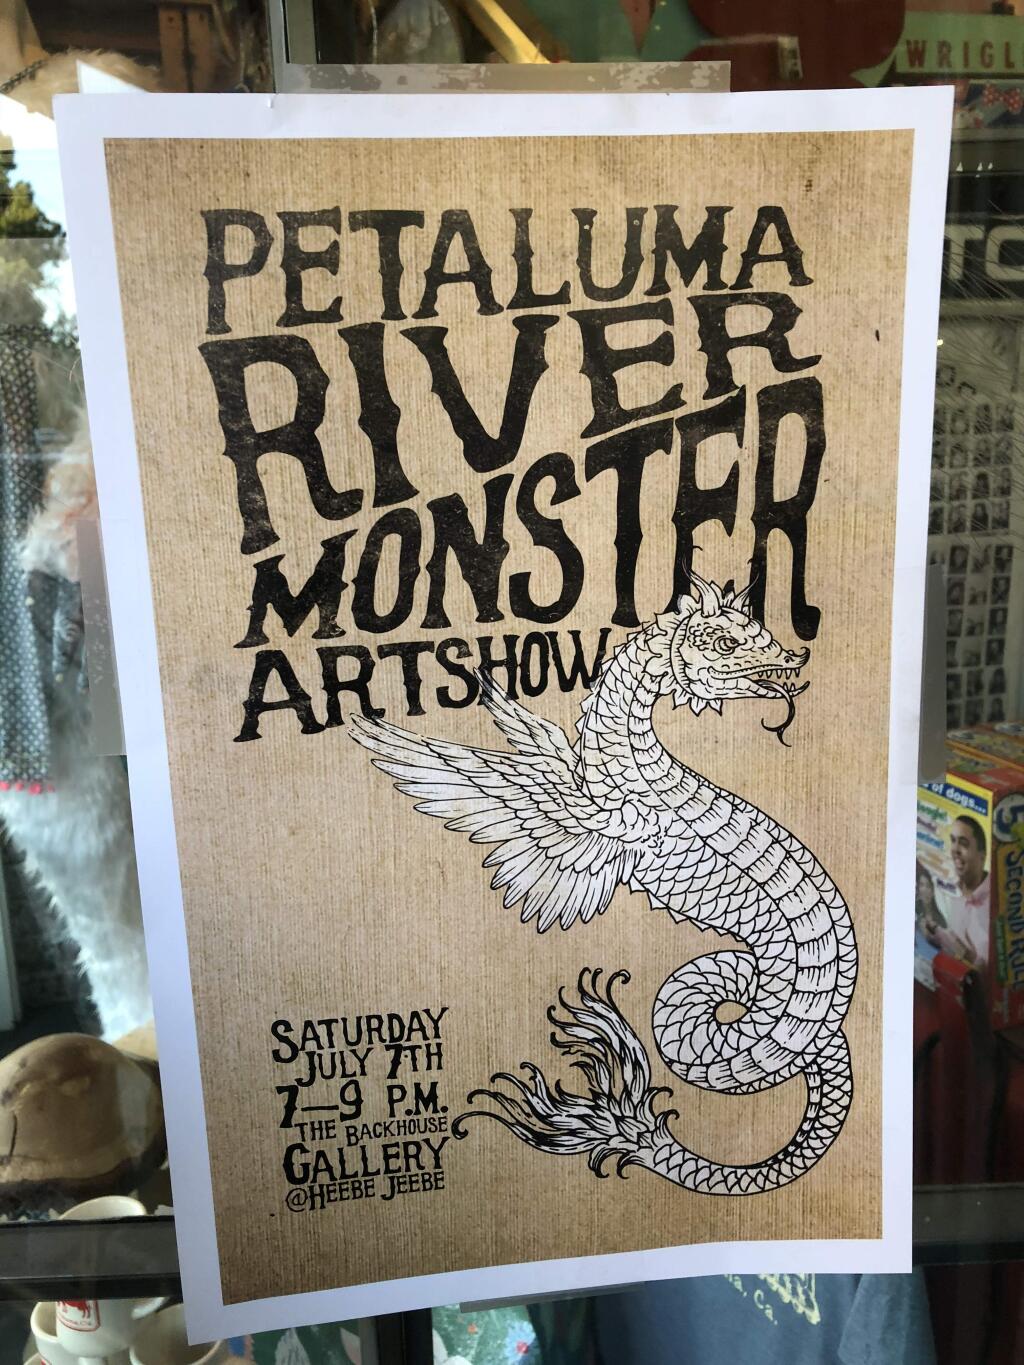 MONSTER SHOW: The 'Petaluma River Monster' show at Heebe Jeebe's Backhouse Gallery runs through the end of July.